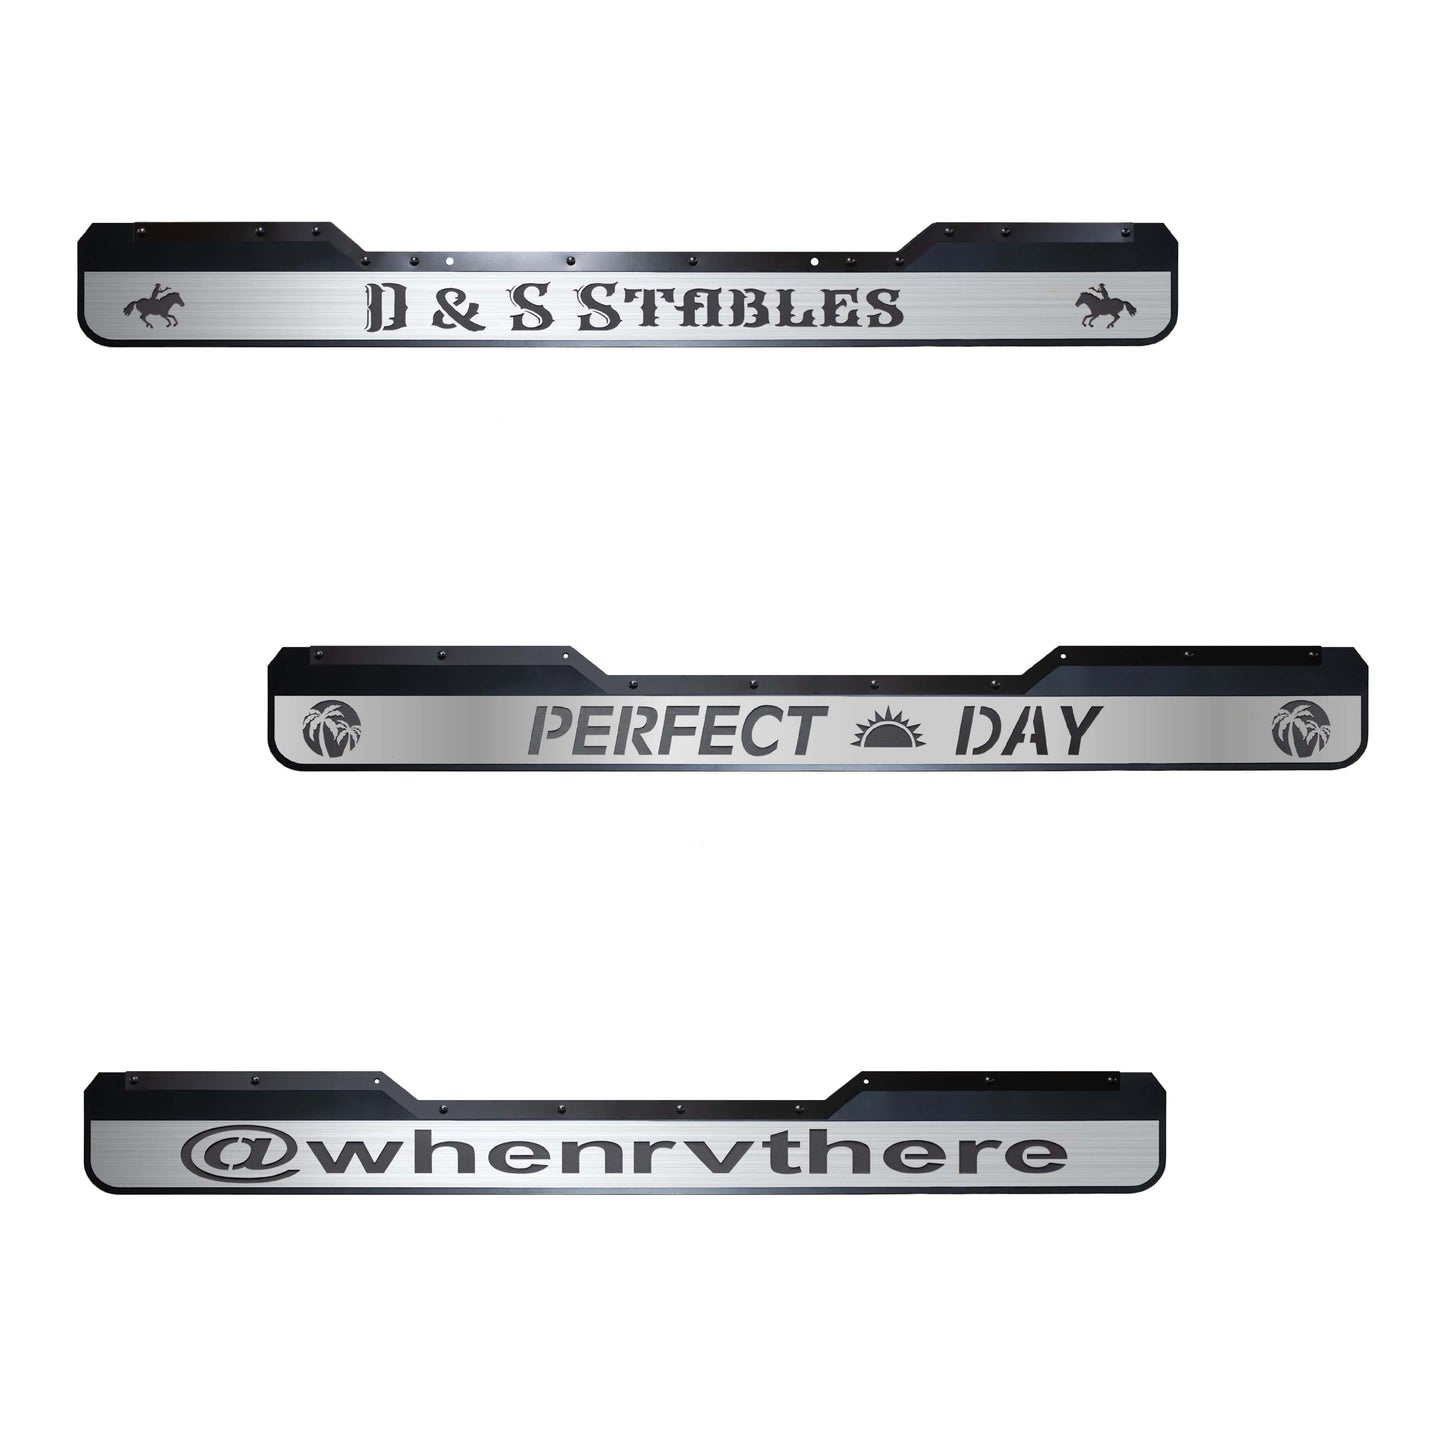 Future-Sales-Build-your-own-custom-Rock-Guard-rubber-size-face-plate-finish-symbol-font-text-Mirror-Finish-Brushed-Top-Bars-Backer-Plate-MFR-CUSTOM